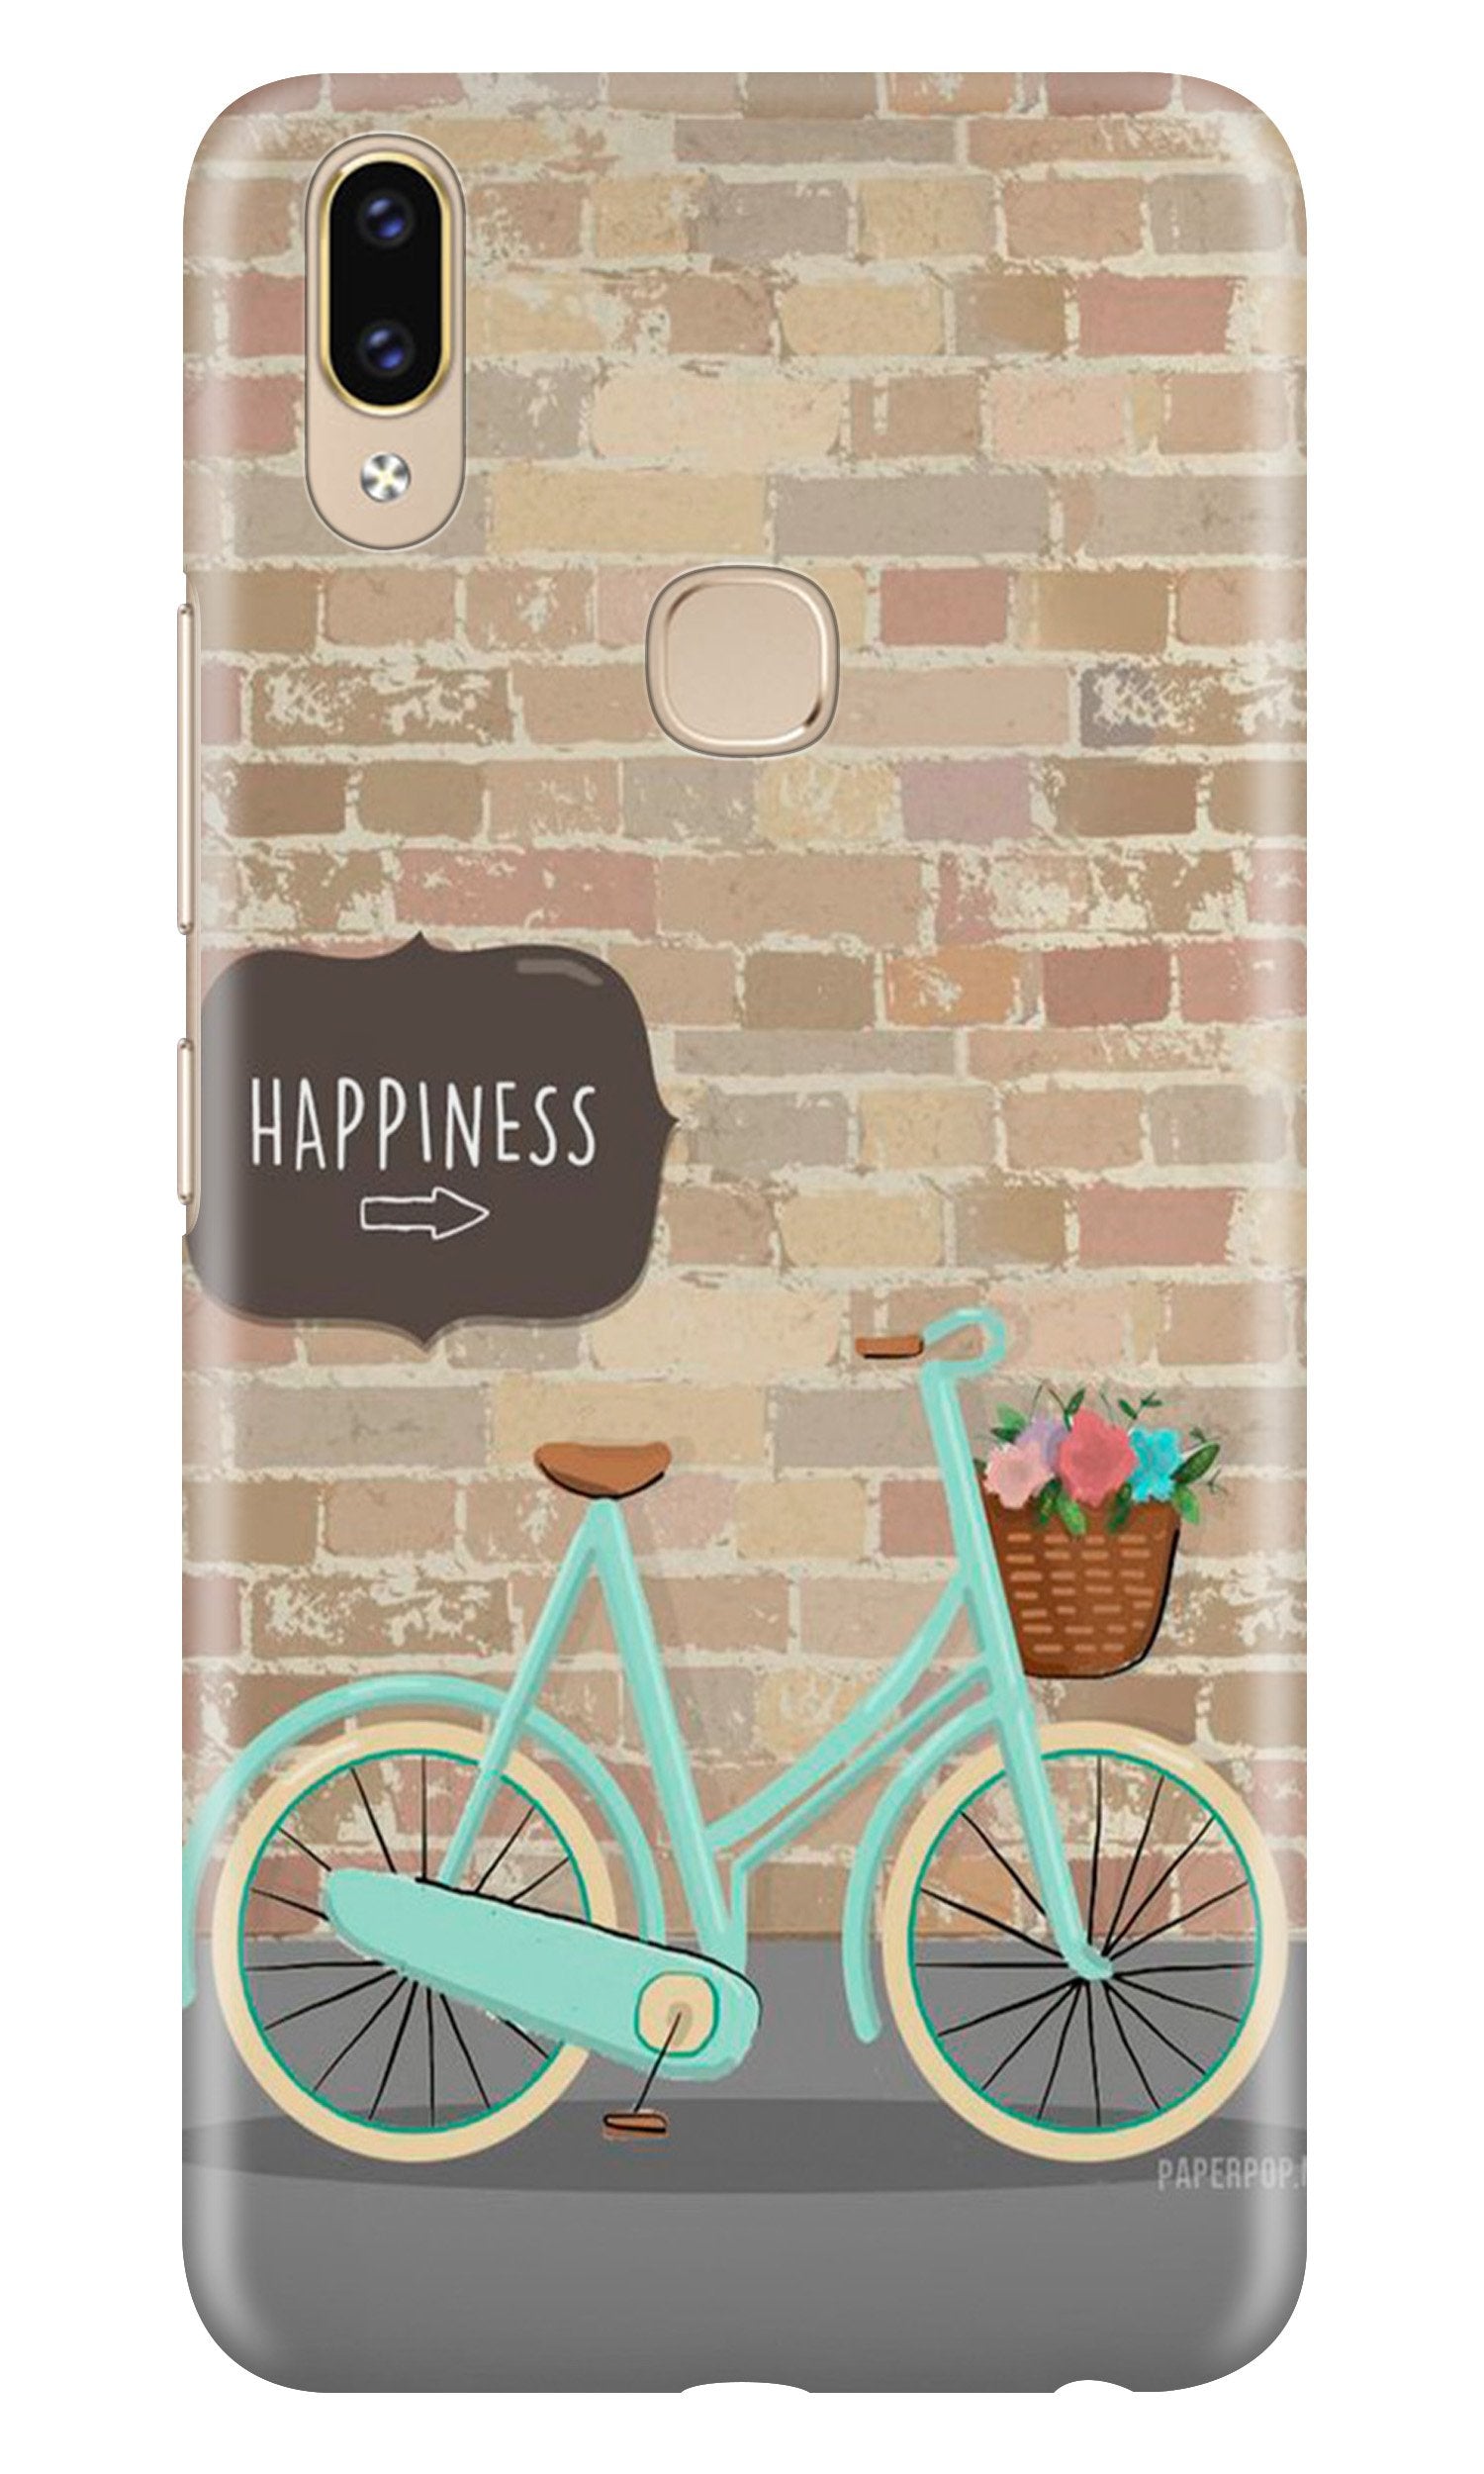 Happiness Case for Asus Zenfone Max M2